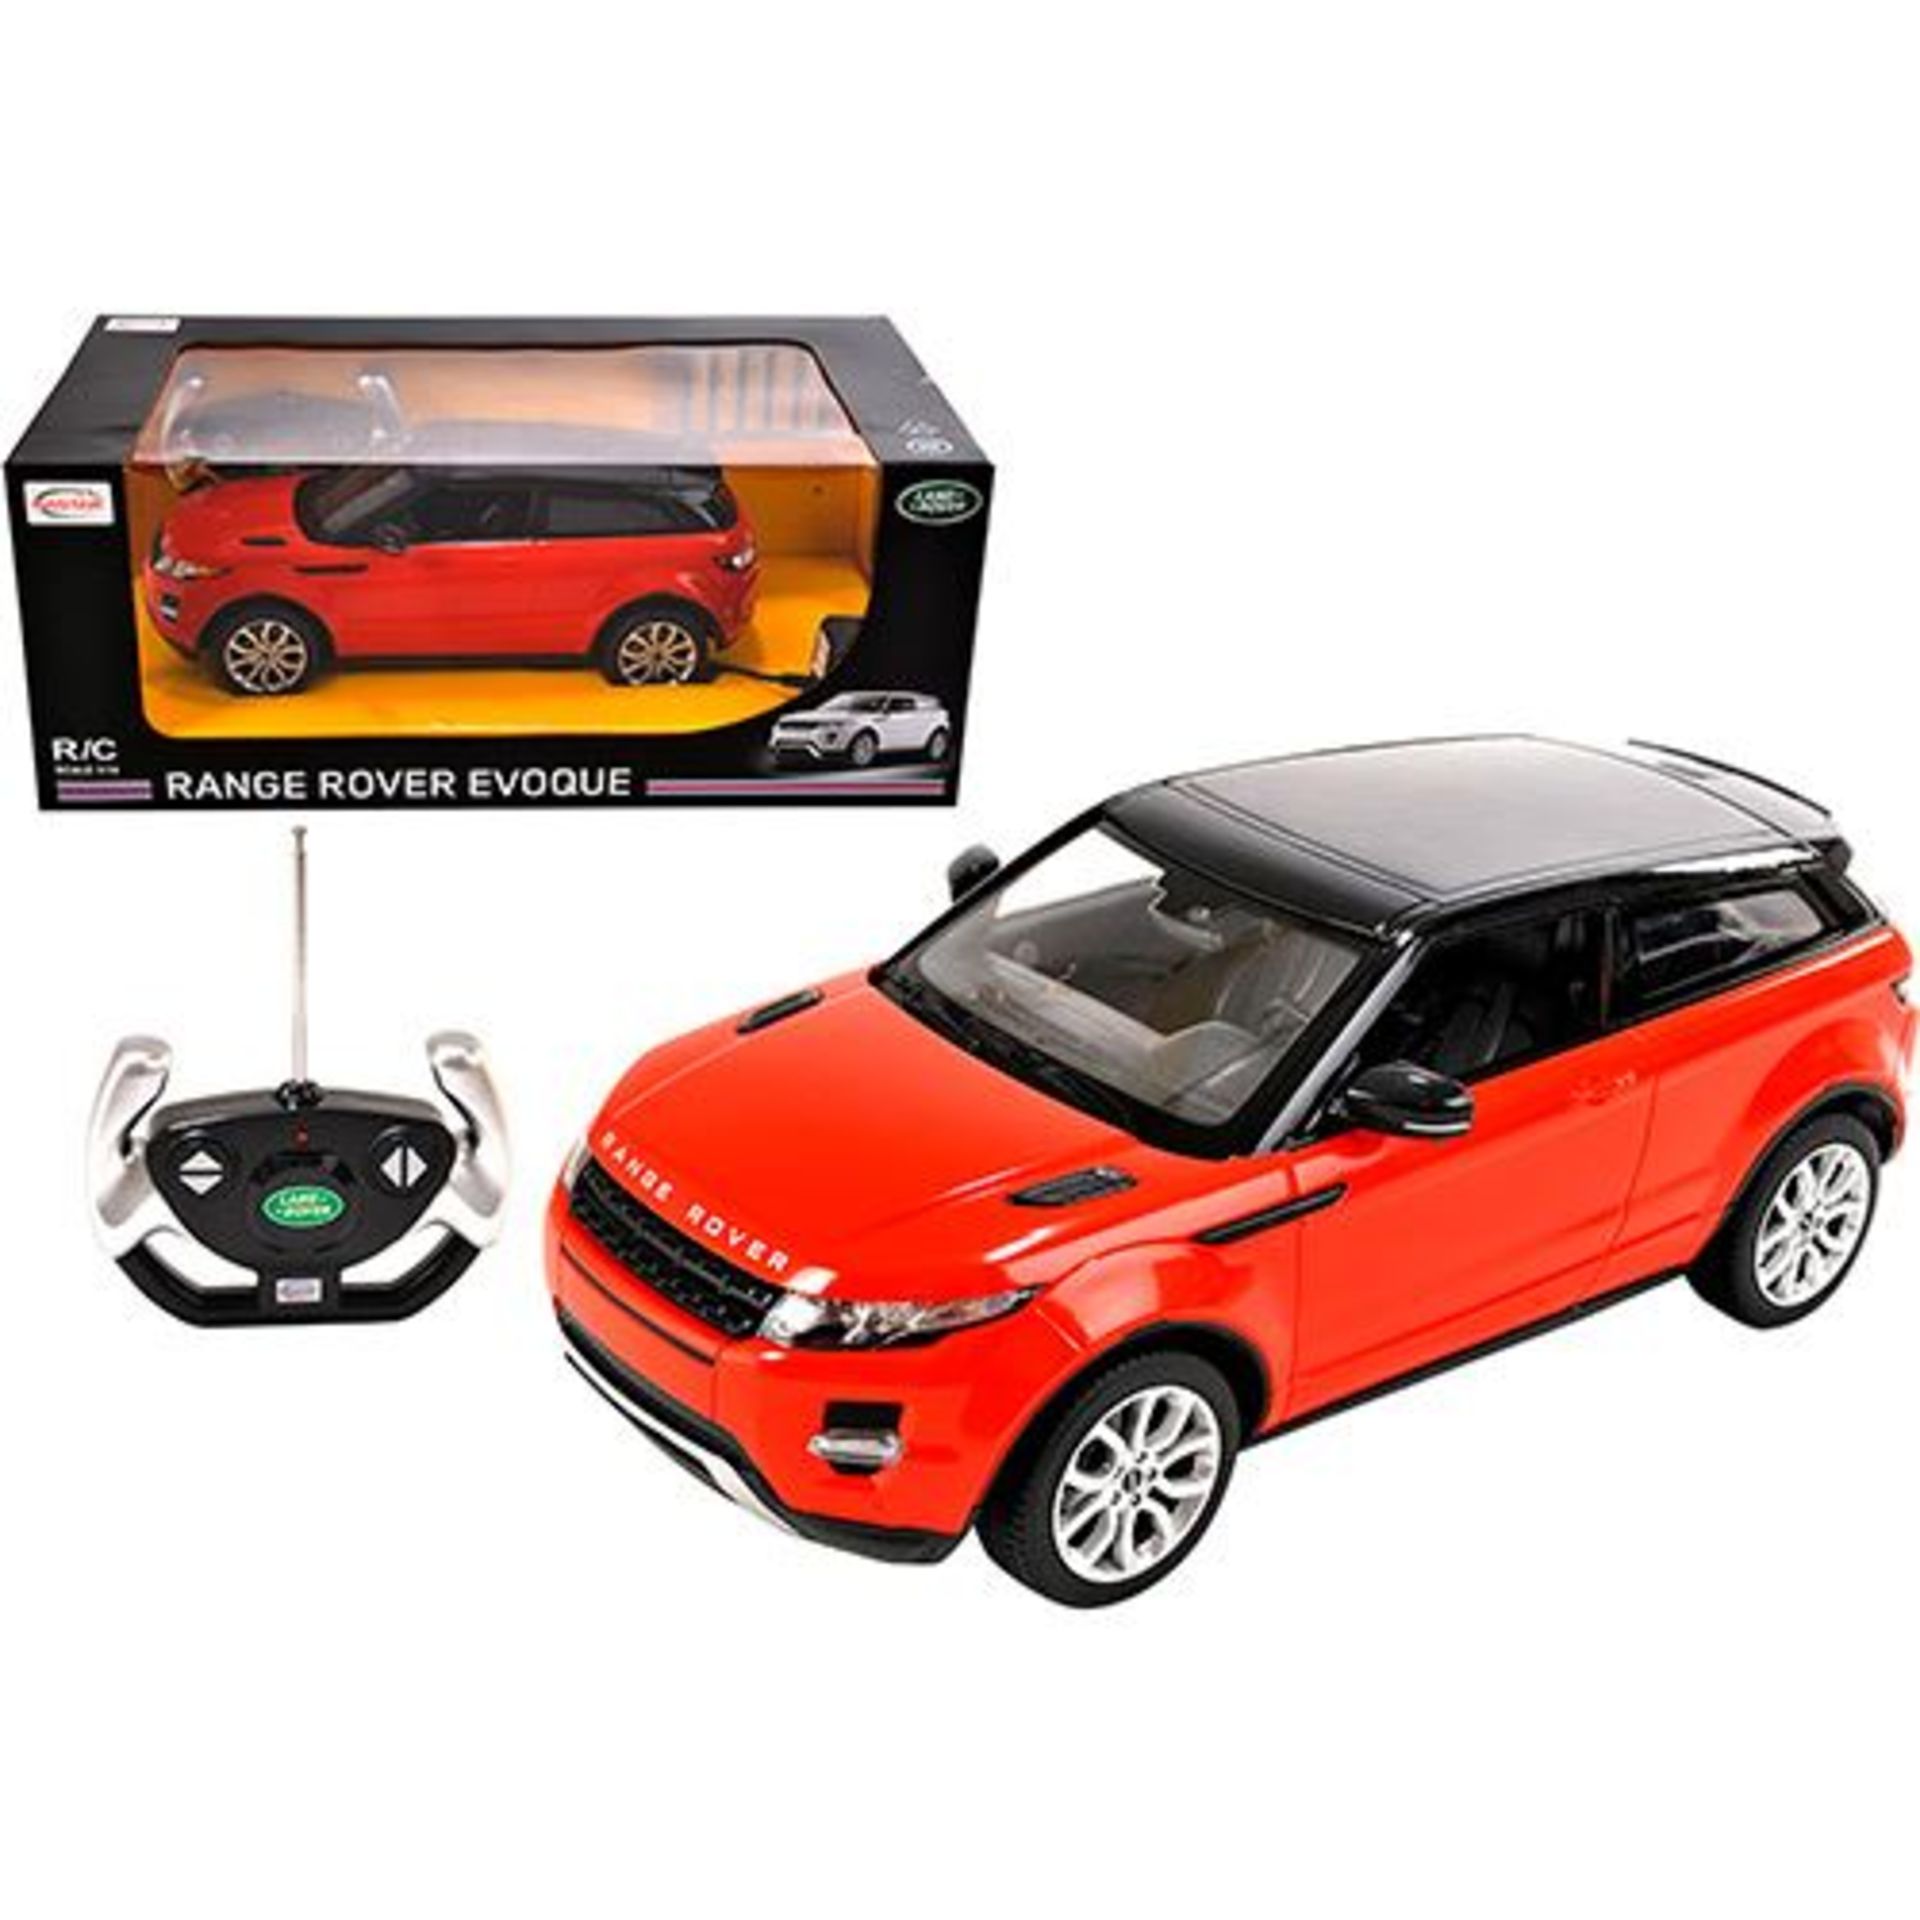 V Brand New 1:14 Scale R/C Range Rover Evoque SRP49.99 Various Colours X 2 YOUR BID PRICE TO BE - Image 2 of 2